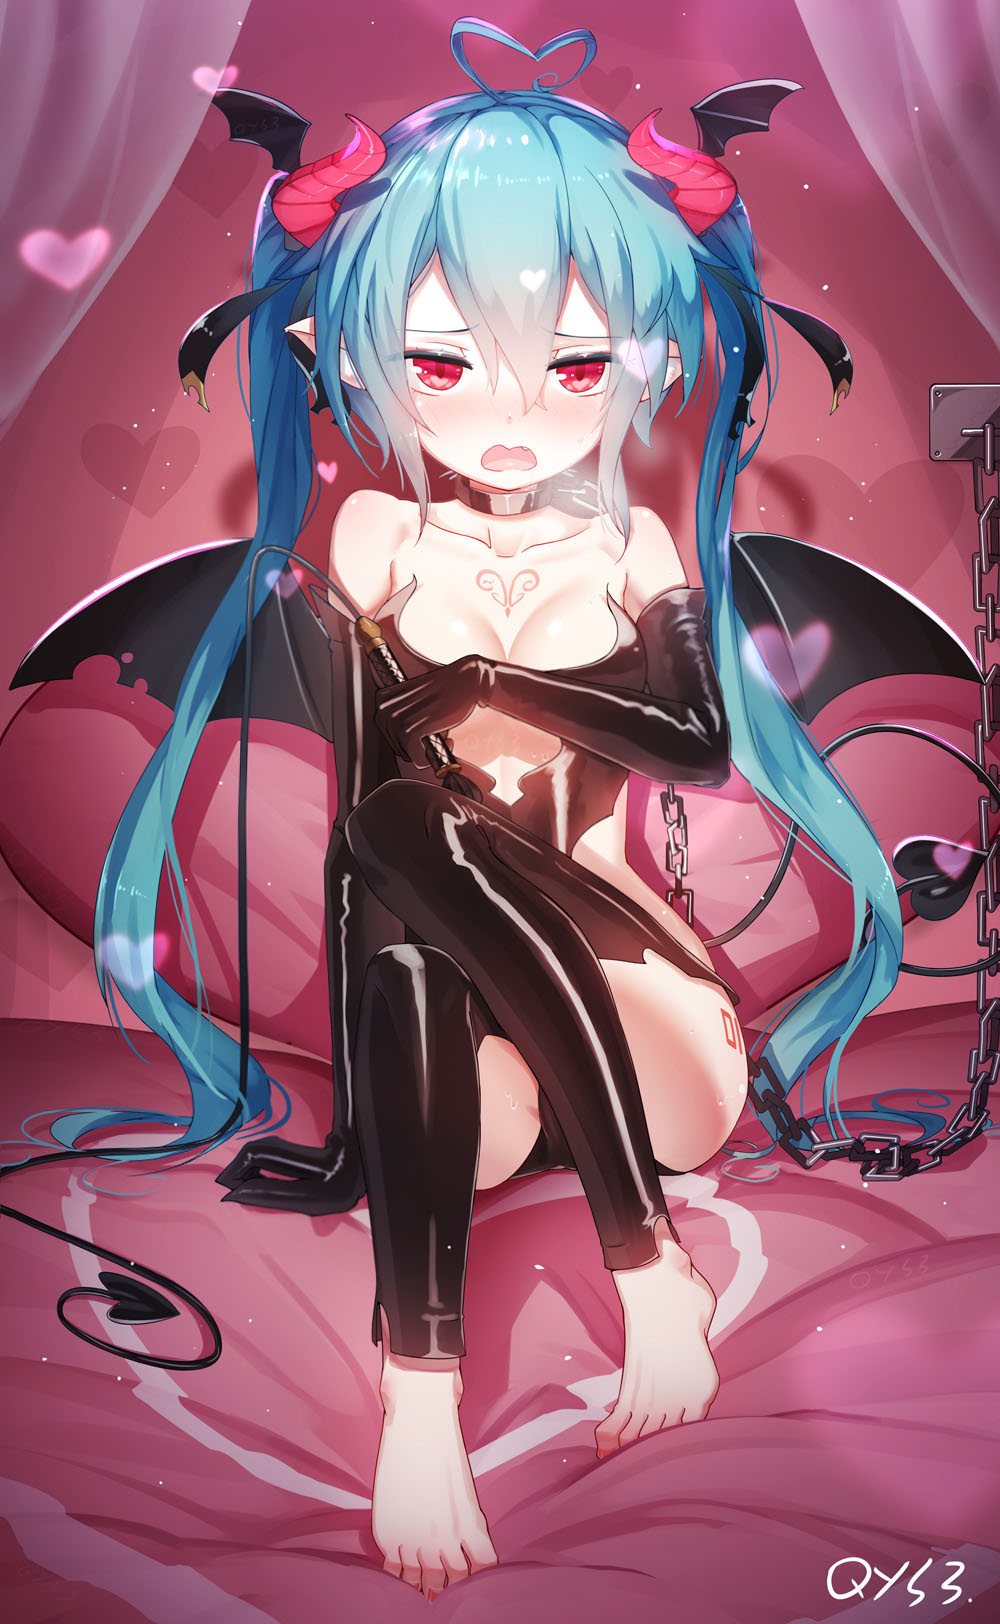 Anime 1000x1624 anime girls digital art portrait display anime barefoot in bed horns wings tail demon girls succubus blue hair twintails red eyes blushing collar chains Vocaloid Hatsune Miku Bai Yemeng womb tattoo